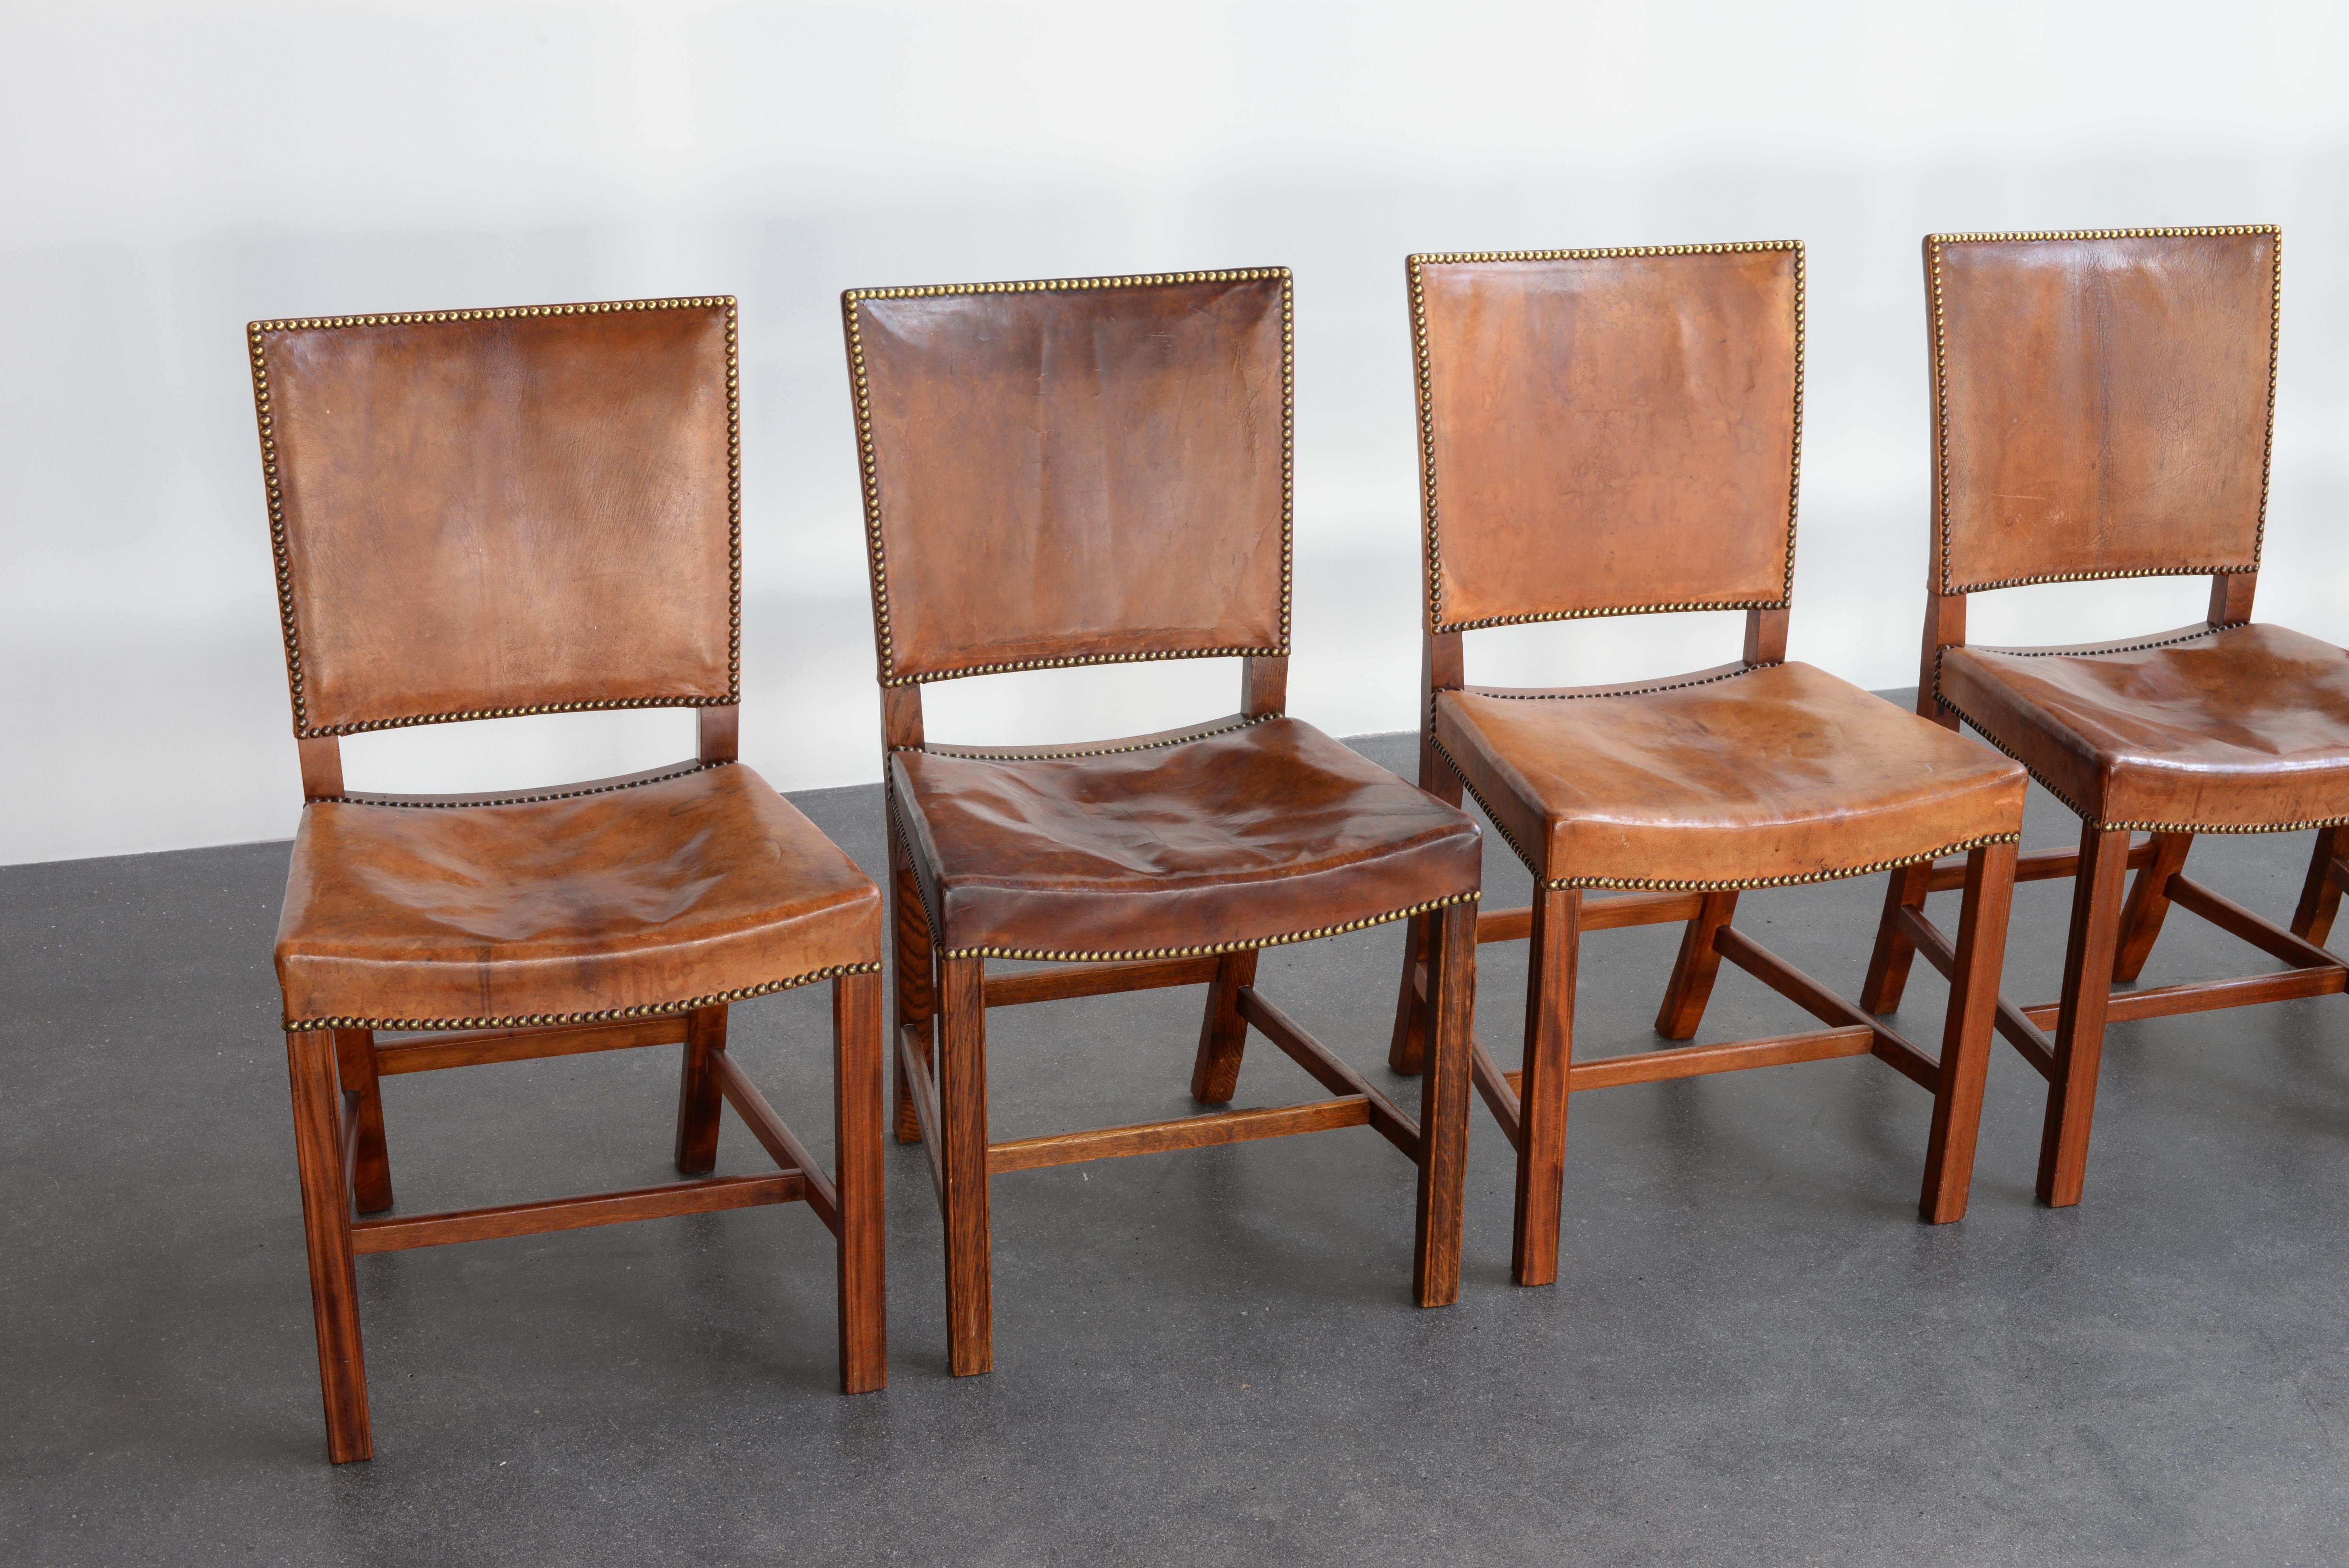 Kaare Klint set of nine red chairs. Executed by Rud. Rasmussen.

Mahogany, oak, Niger leather and brass.

Underside with manufacturer's paper label.